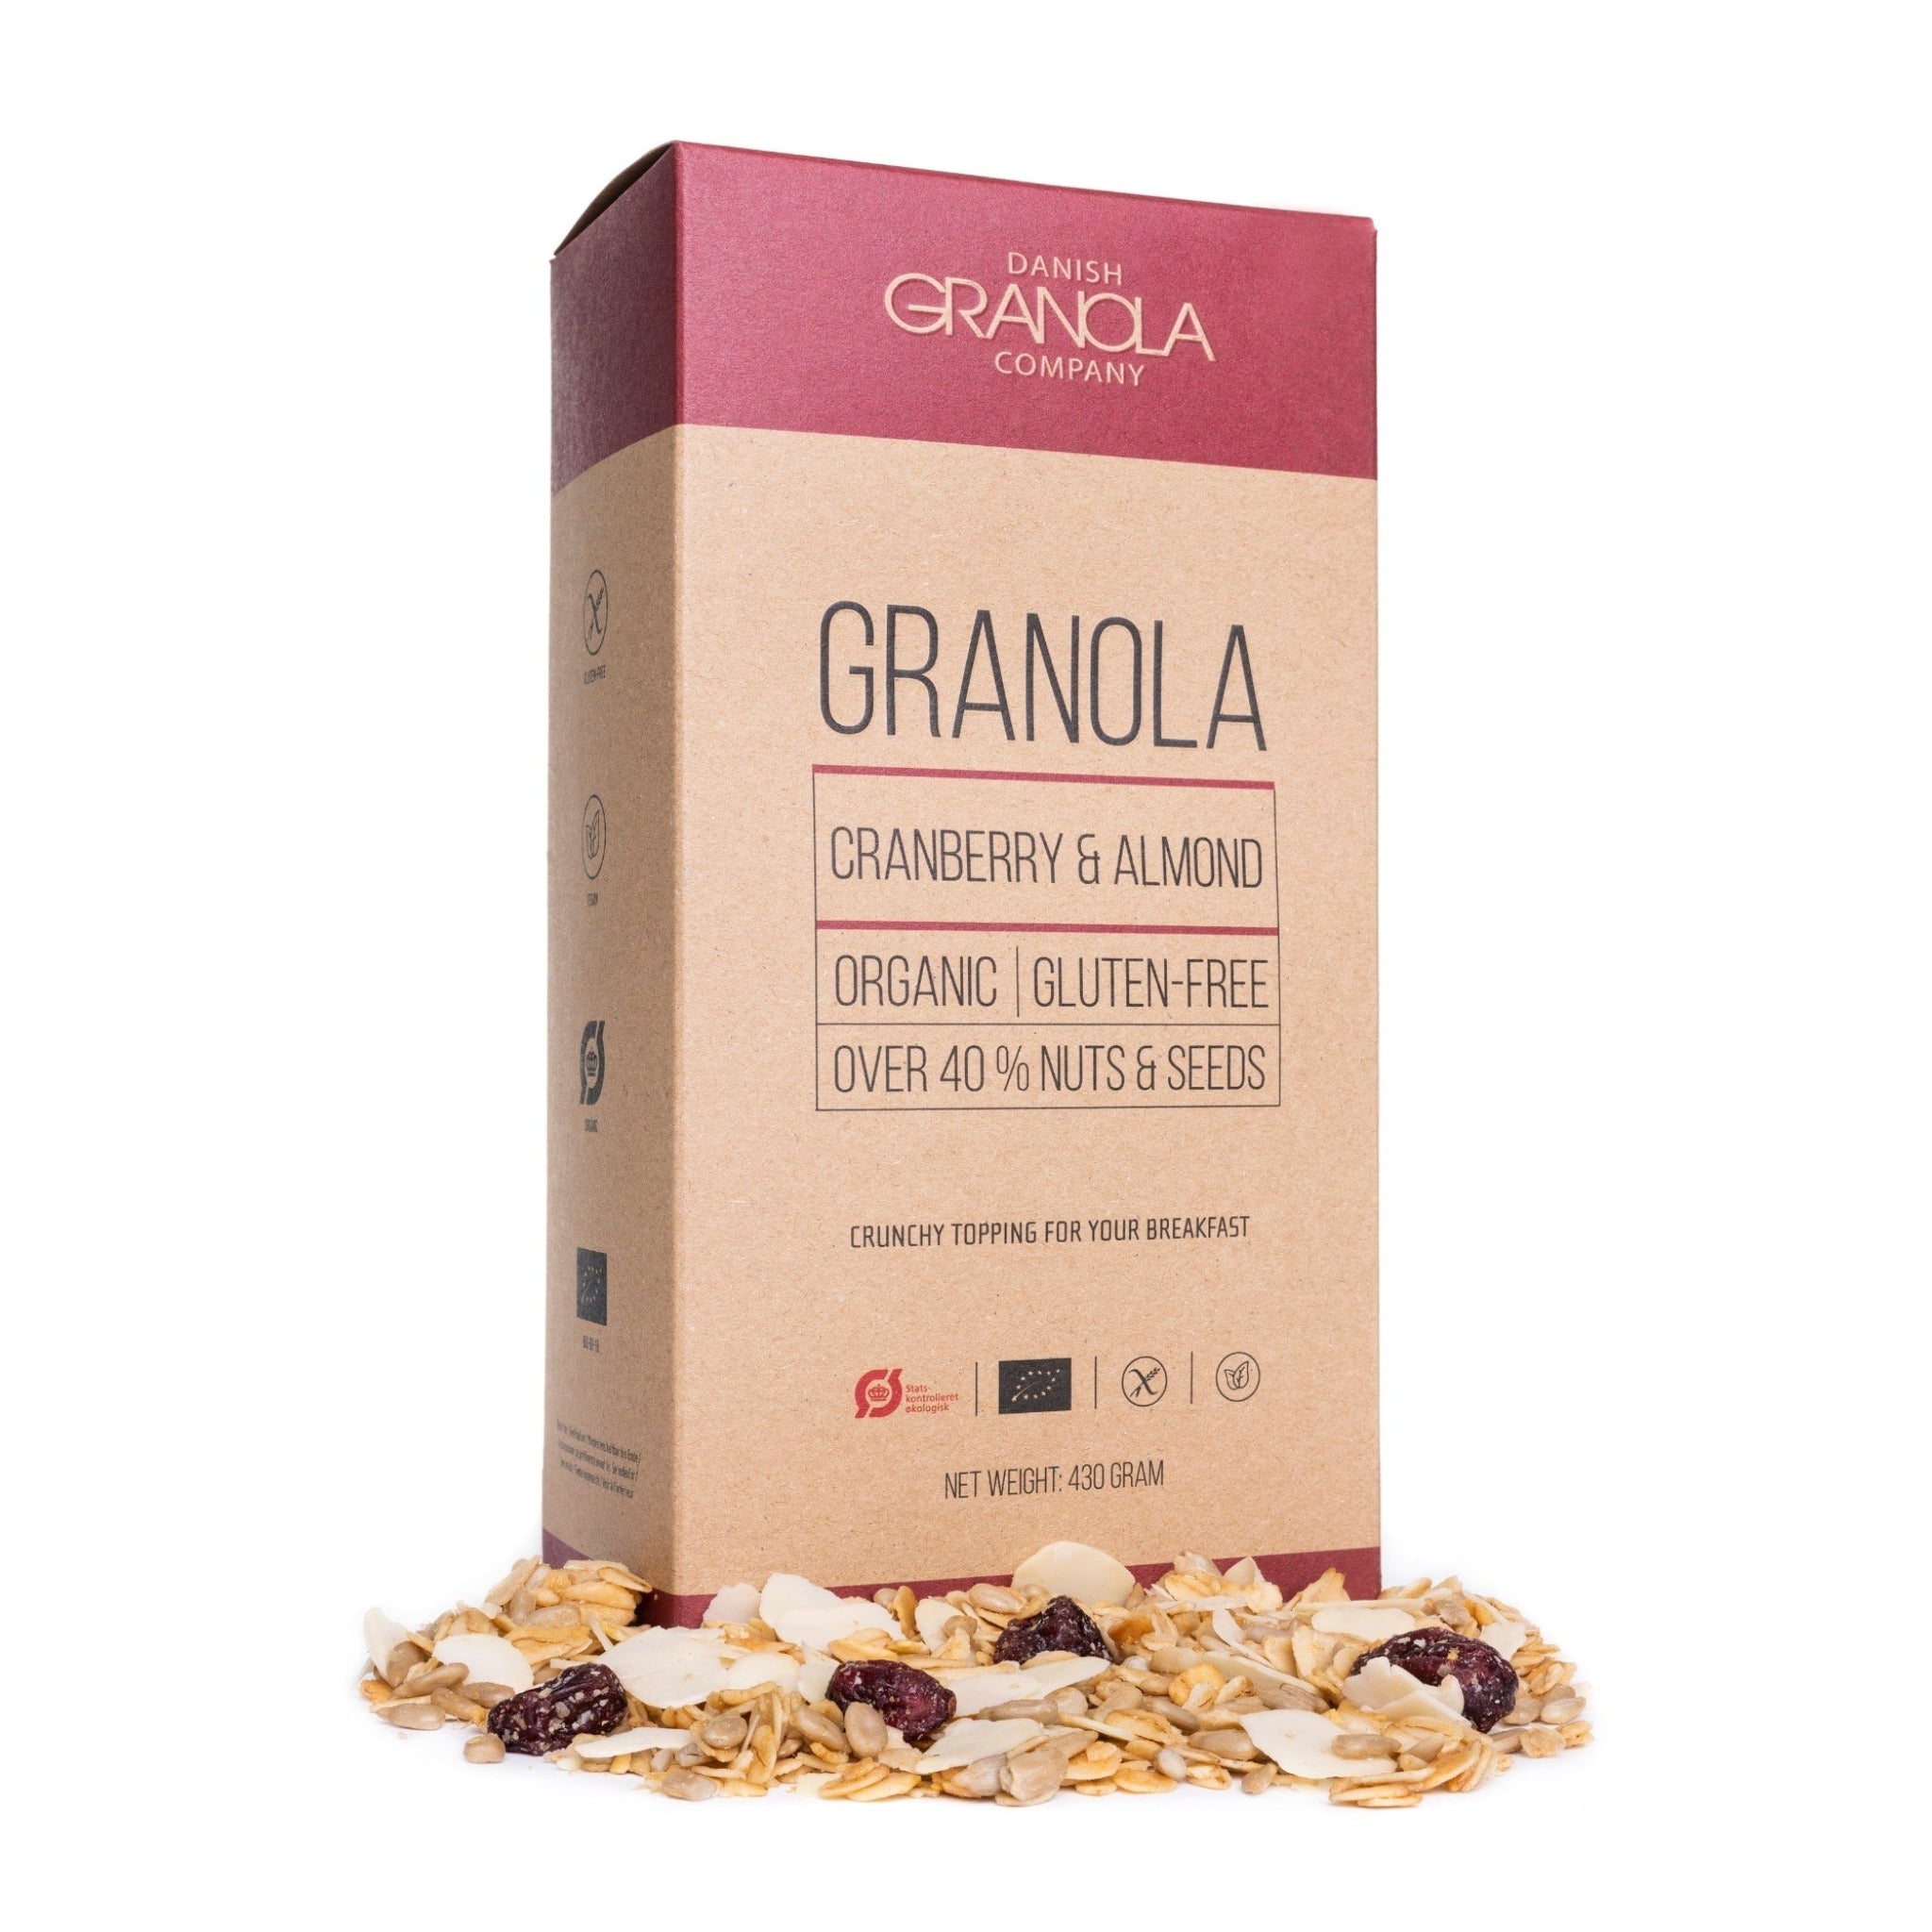 Organic Granola with Almond flakes and Cranberries - The Bio Foods